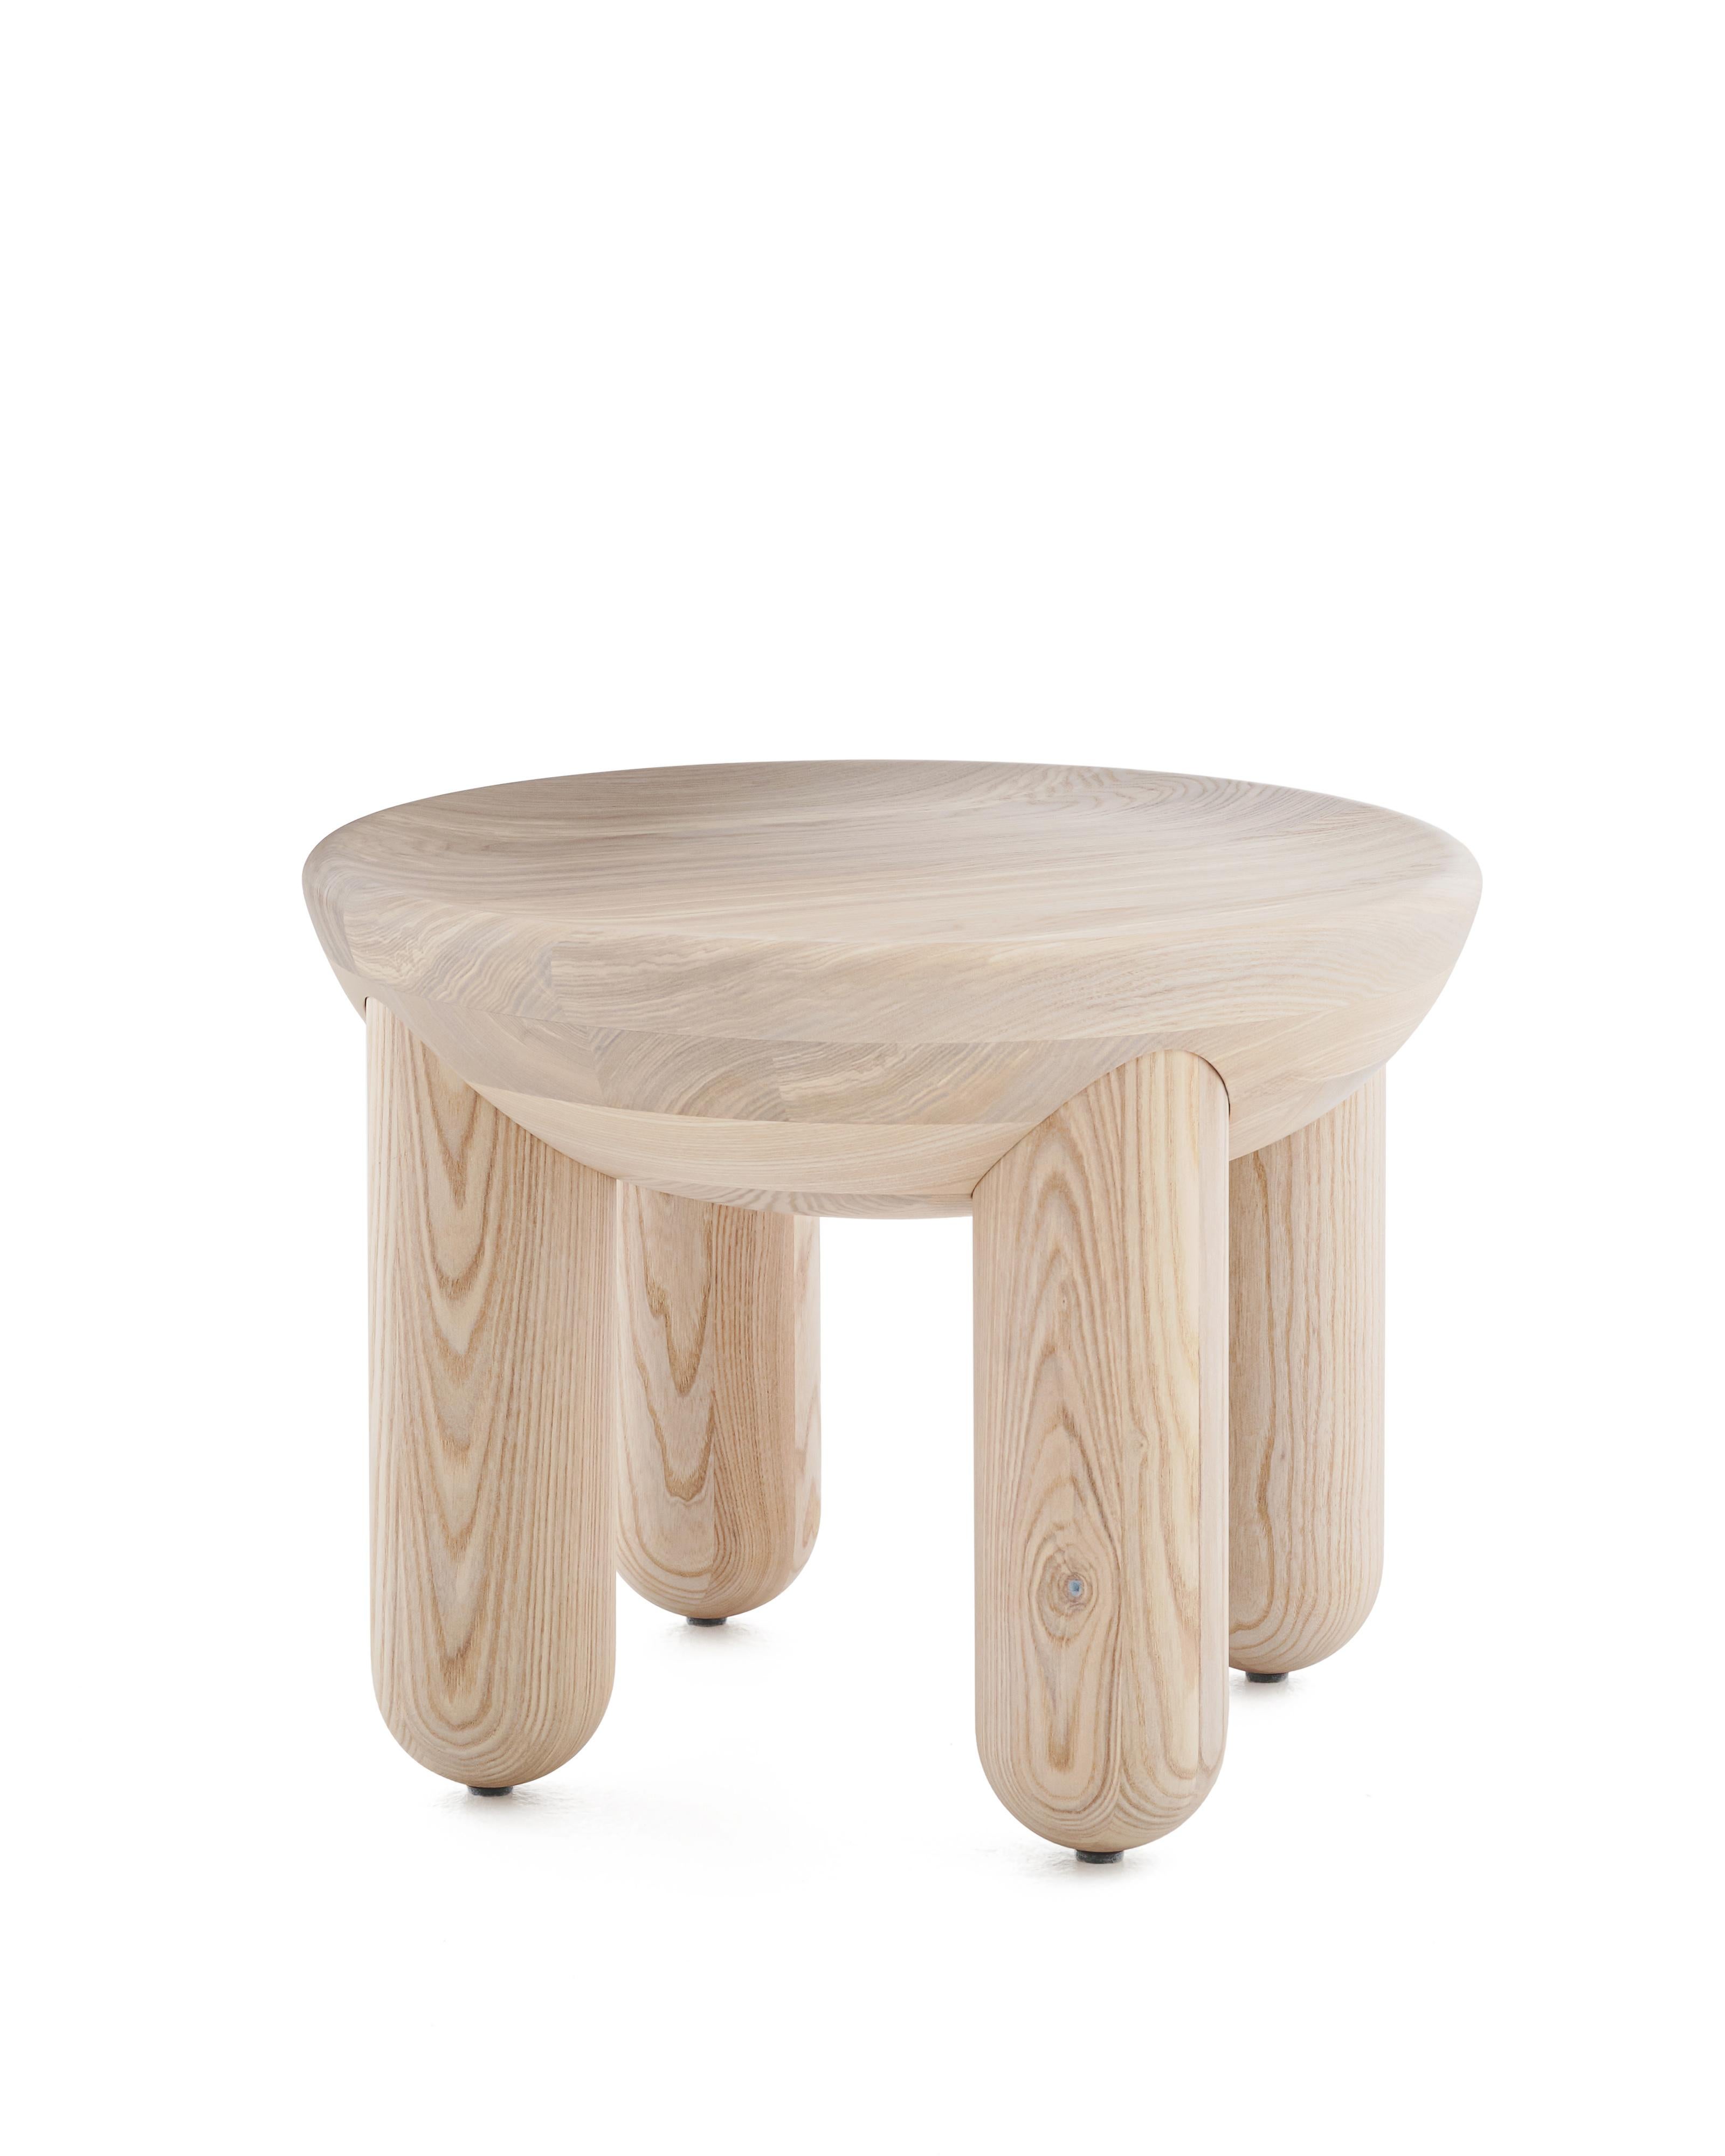 Modern Wooden Coffee Table Freyja 2 in Natural Ash finish by Noom